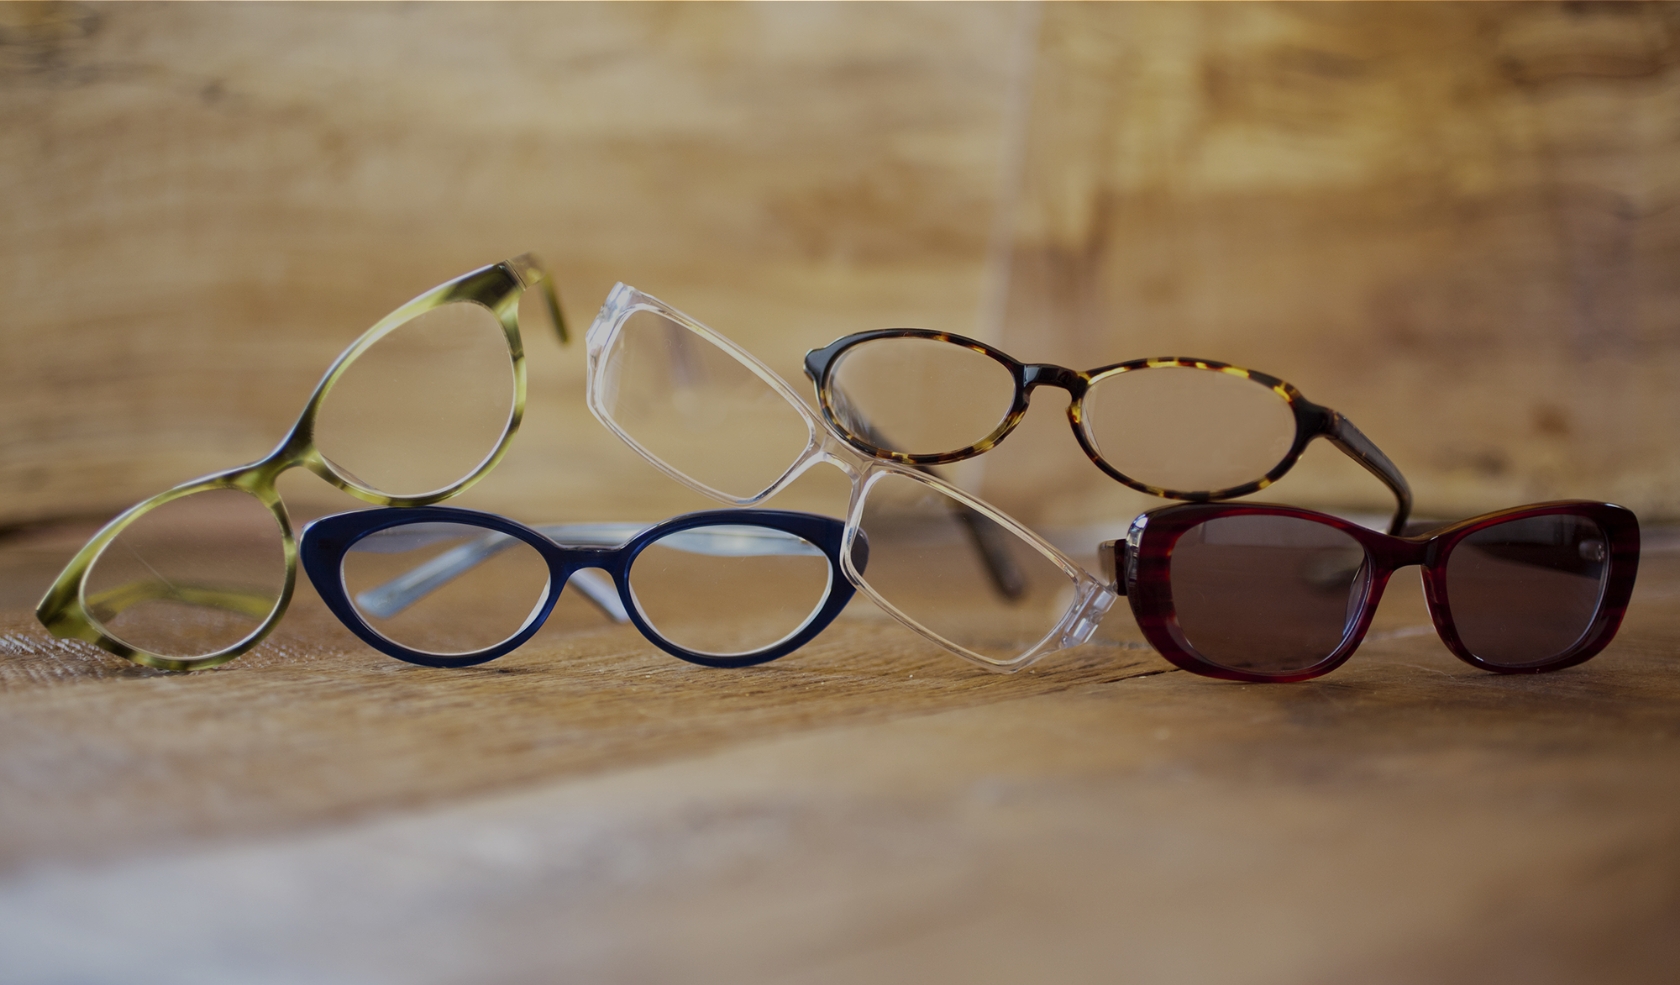 Five pairs of glasses stacked on a wooden surface